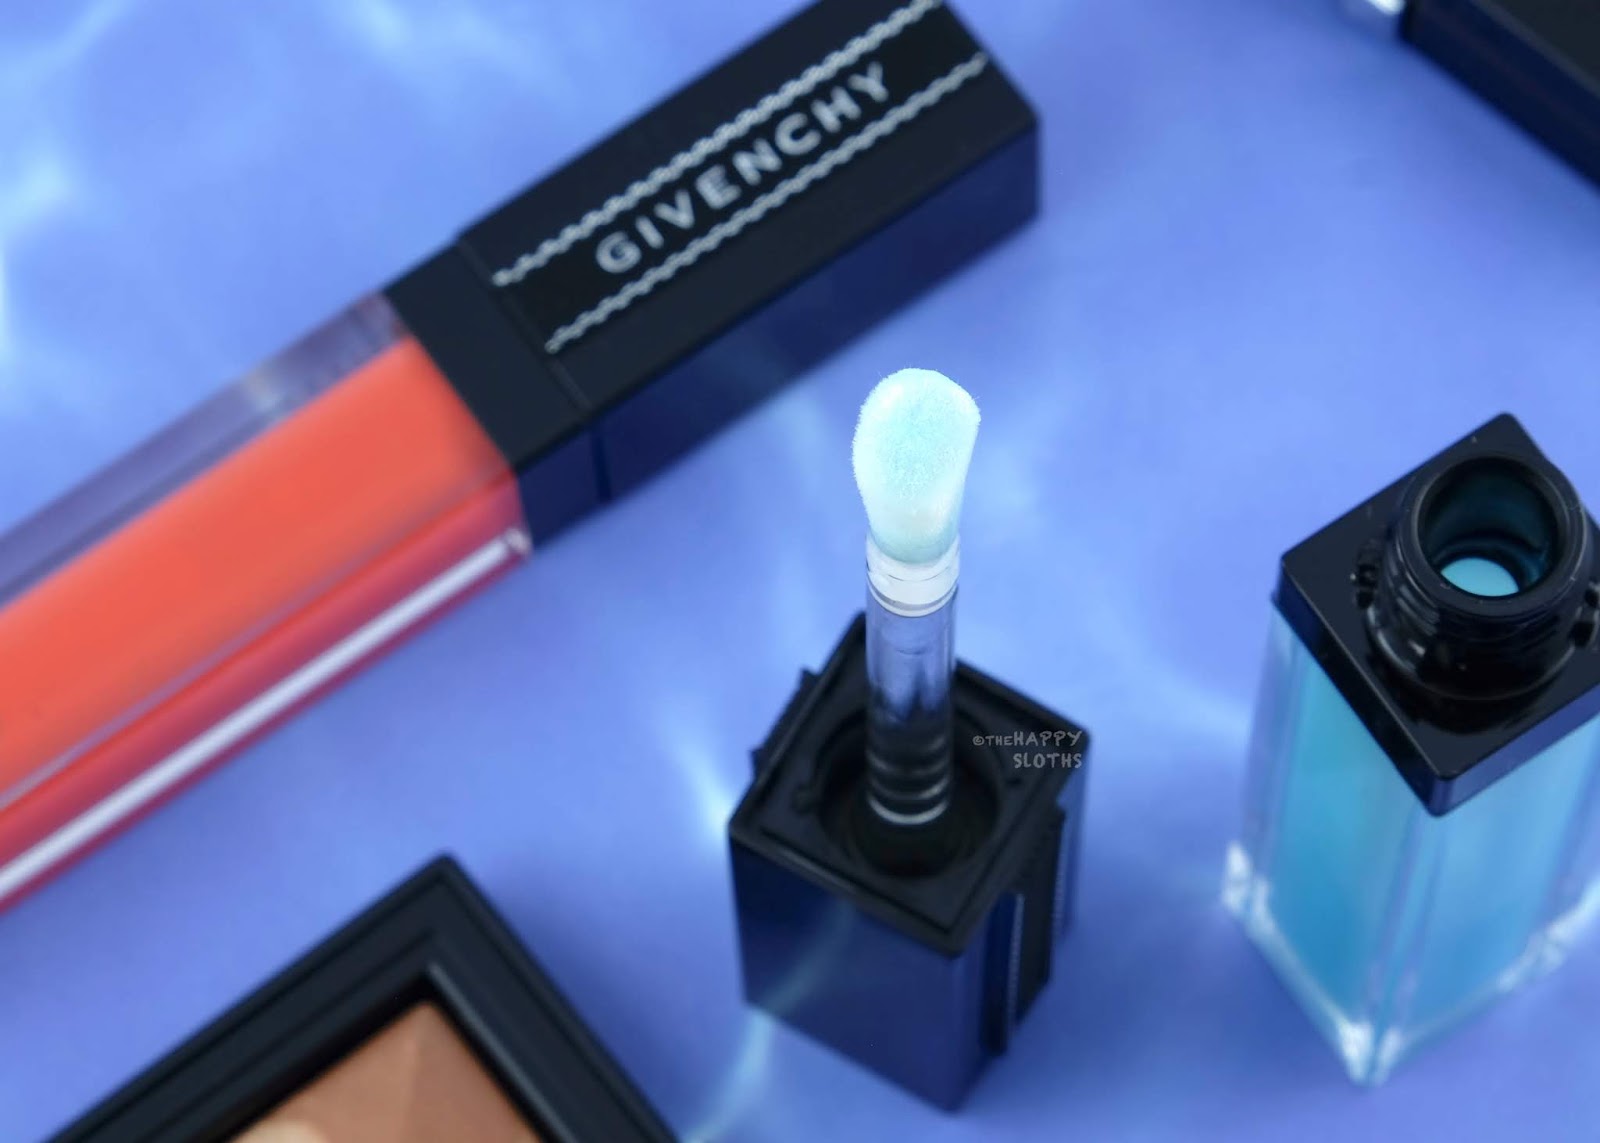 Givenchy | Summer 2019 Gloss Interdit Vinyl in "14 Solar Orange" & "15 Vibrant Blue": Review and Swatches